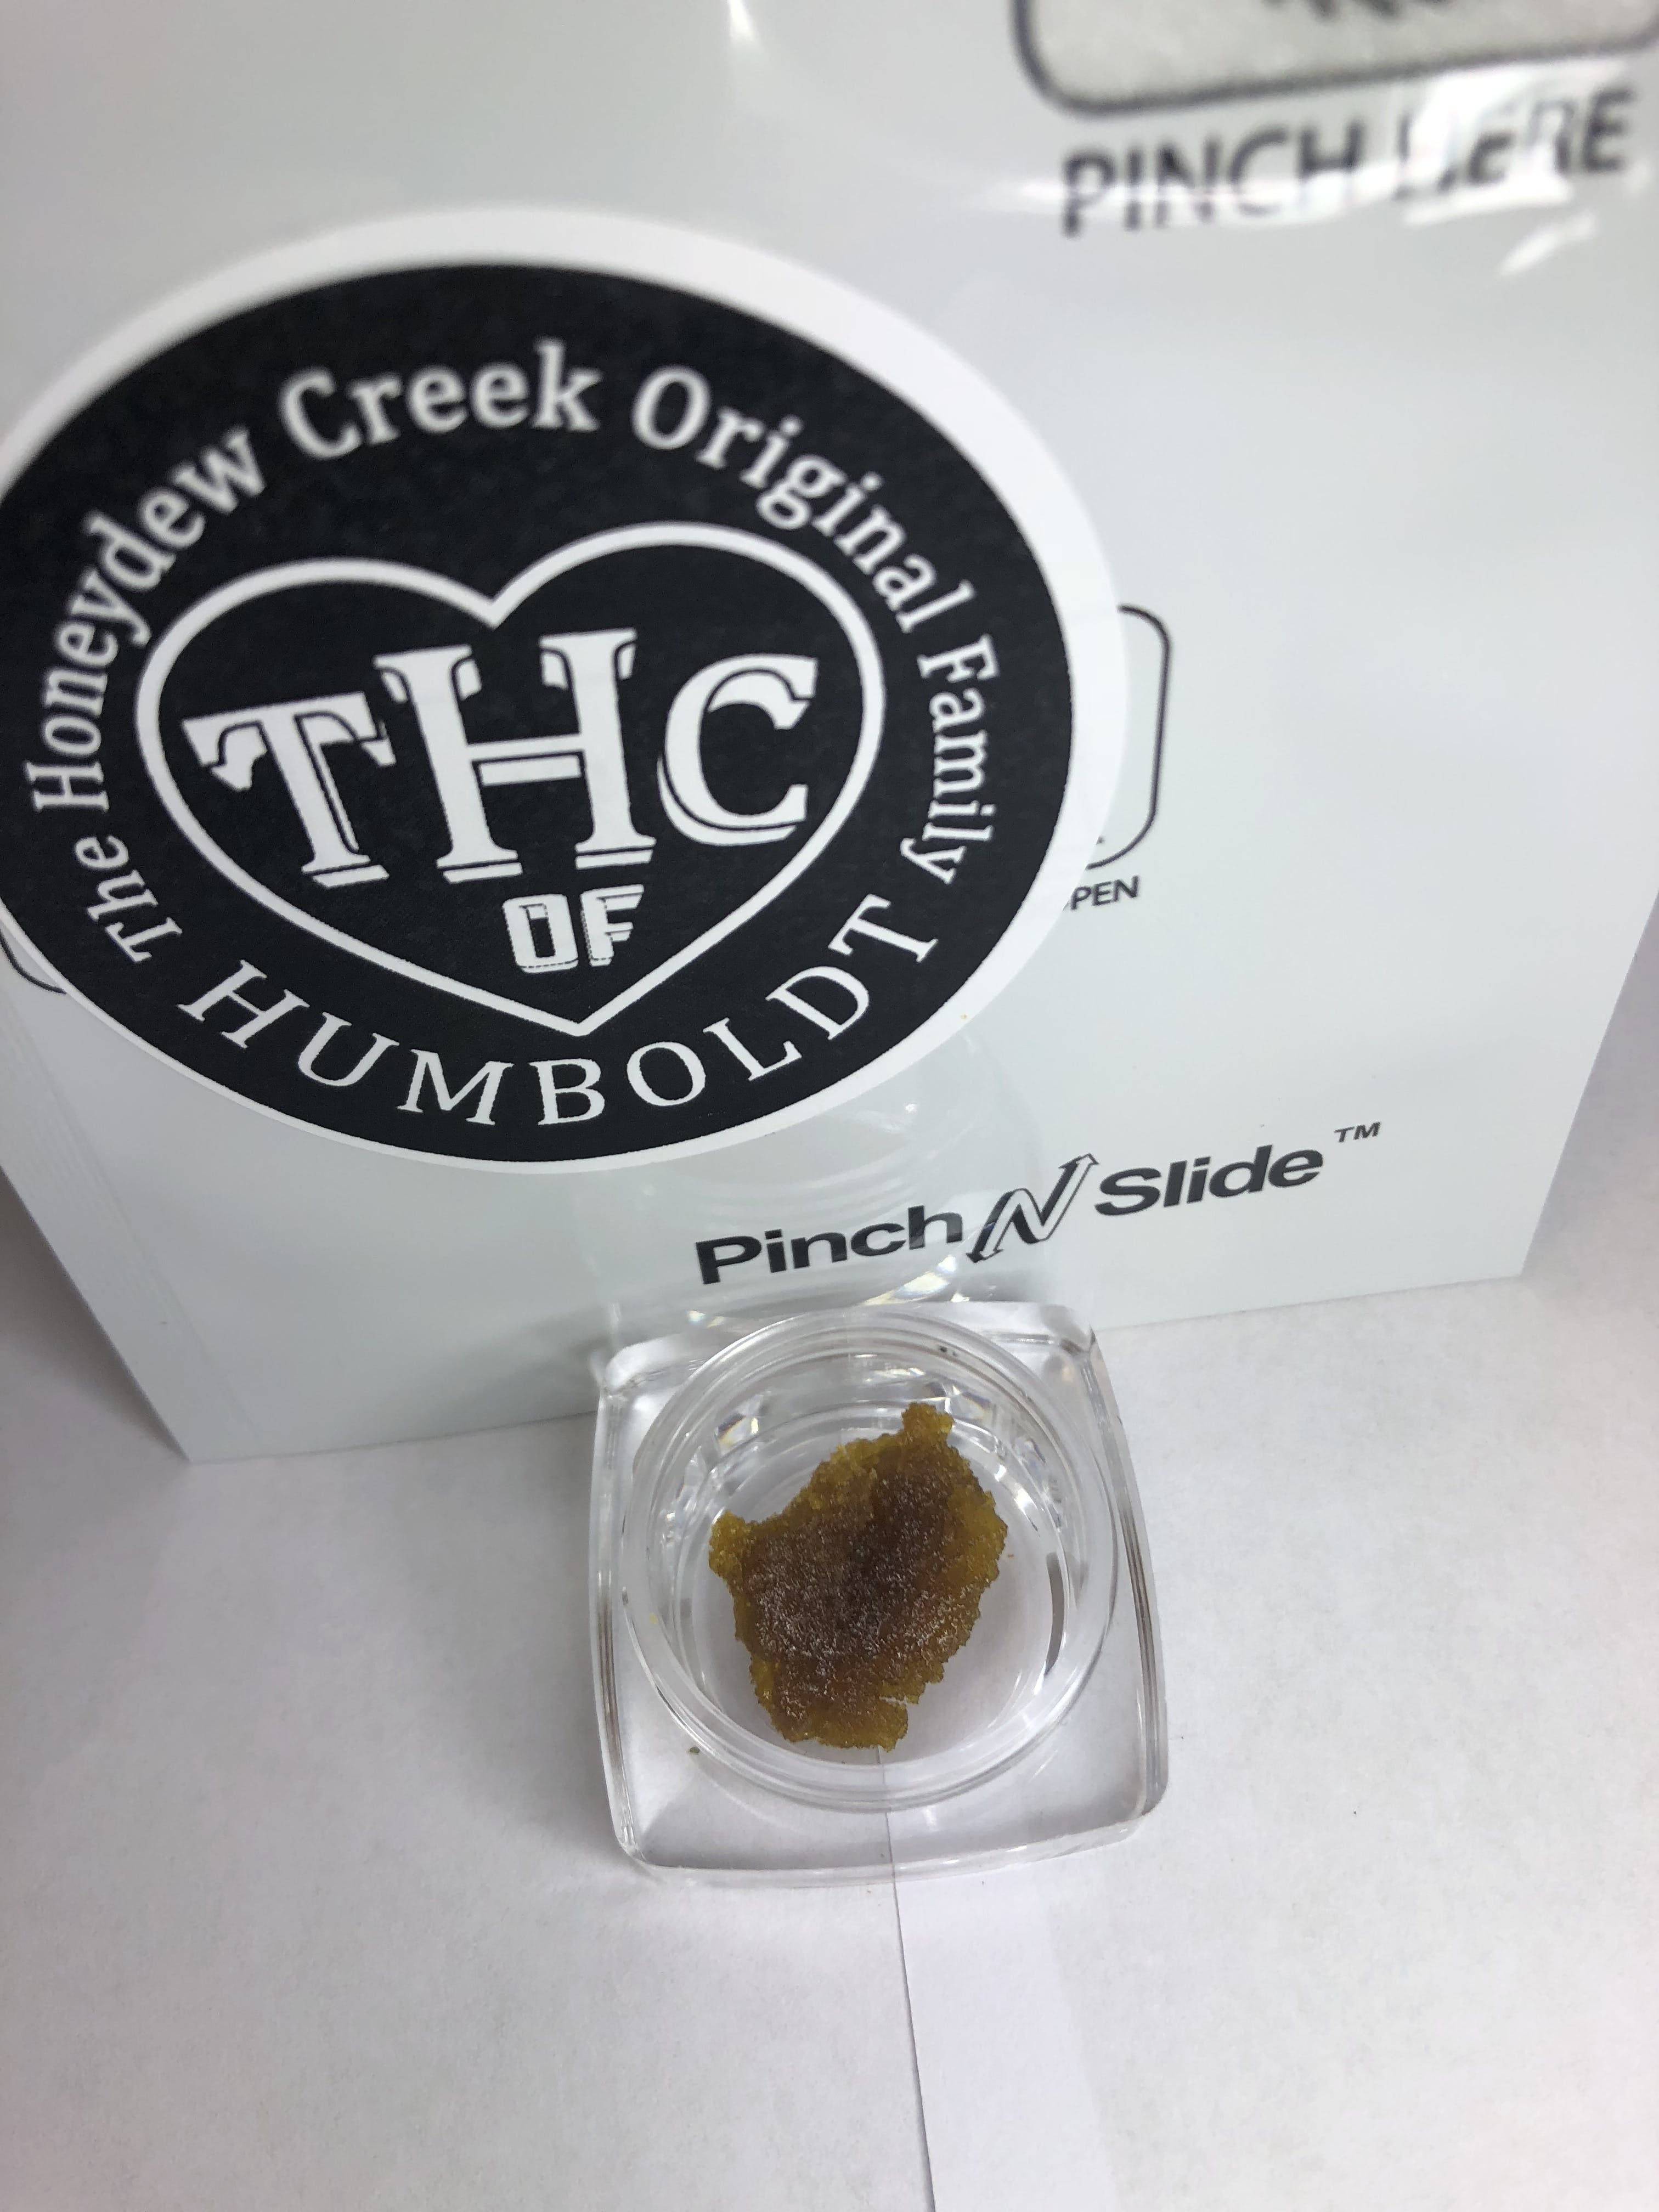 concentrate-blackberry-fire-shatter-by-the-honeydew-creek-original-famil